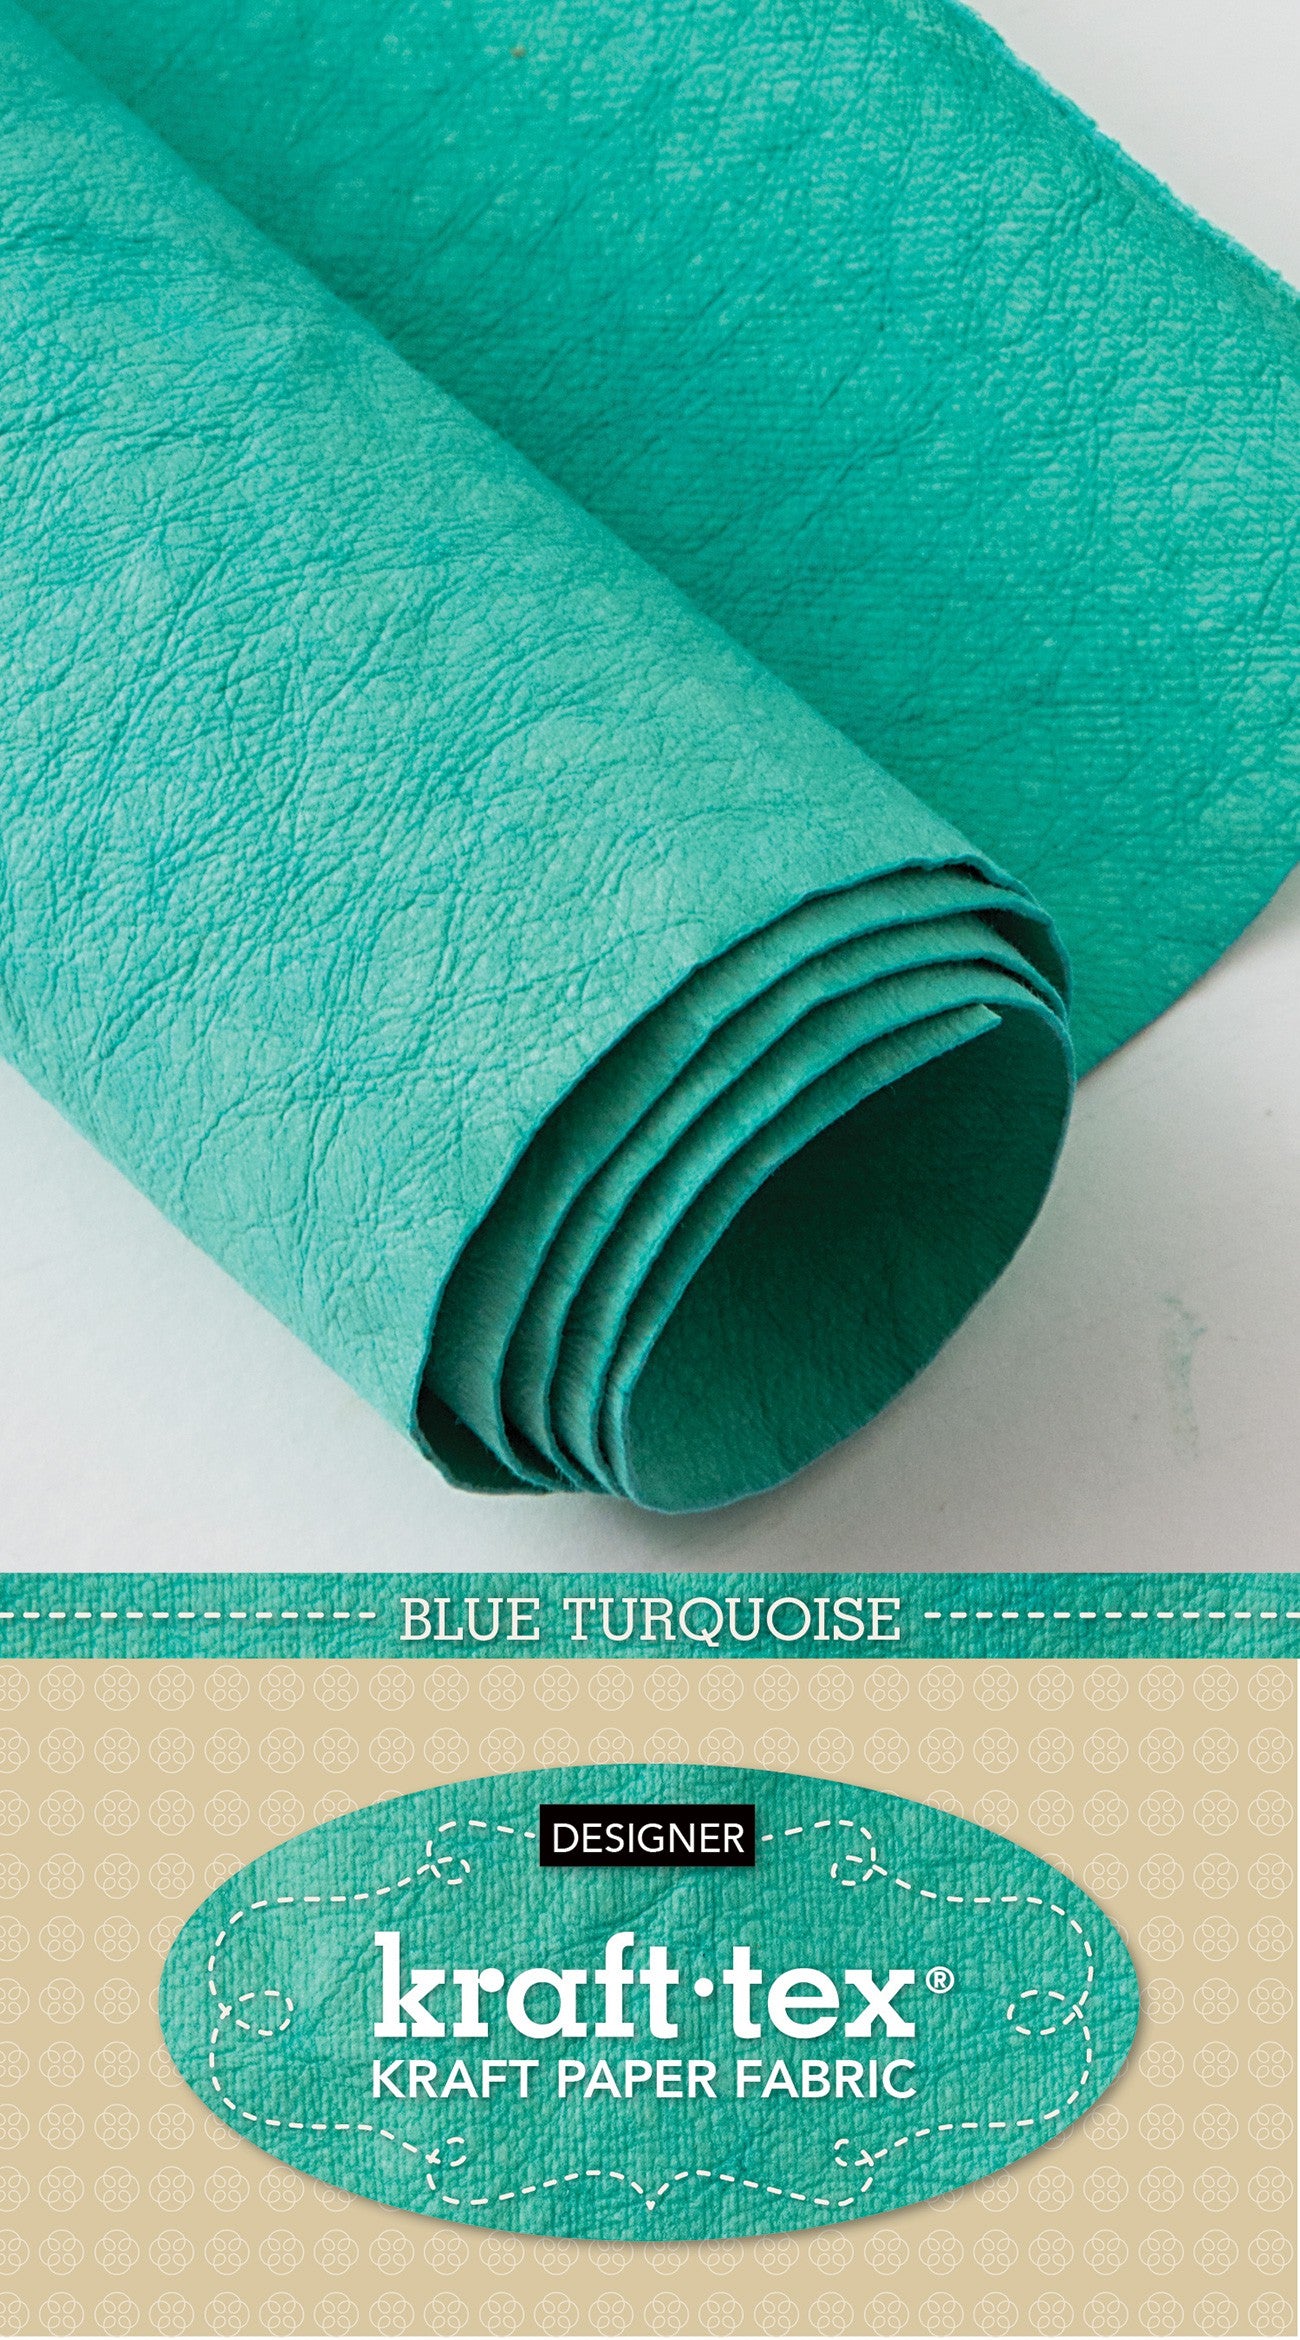 Kraft-Tex Roll, Designer Blue Turquoise, 18.5 Inches x 28.5 Inches Hand-Dyed Prewashed Paper Fabric